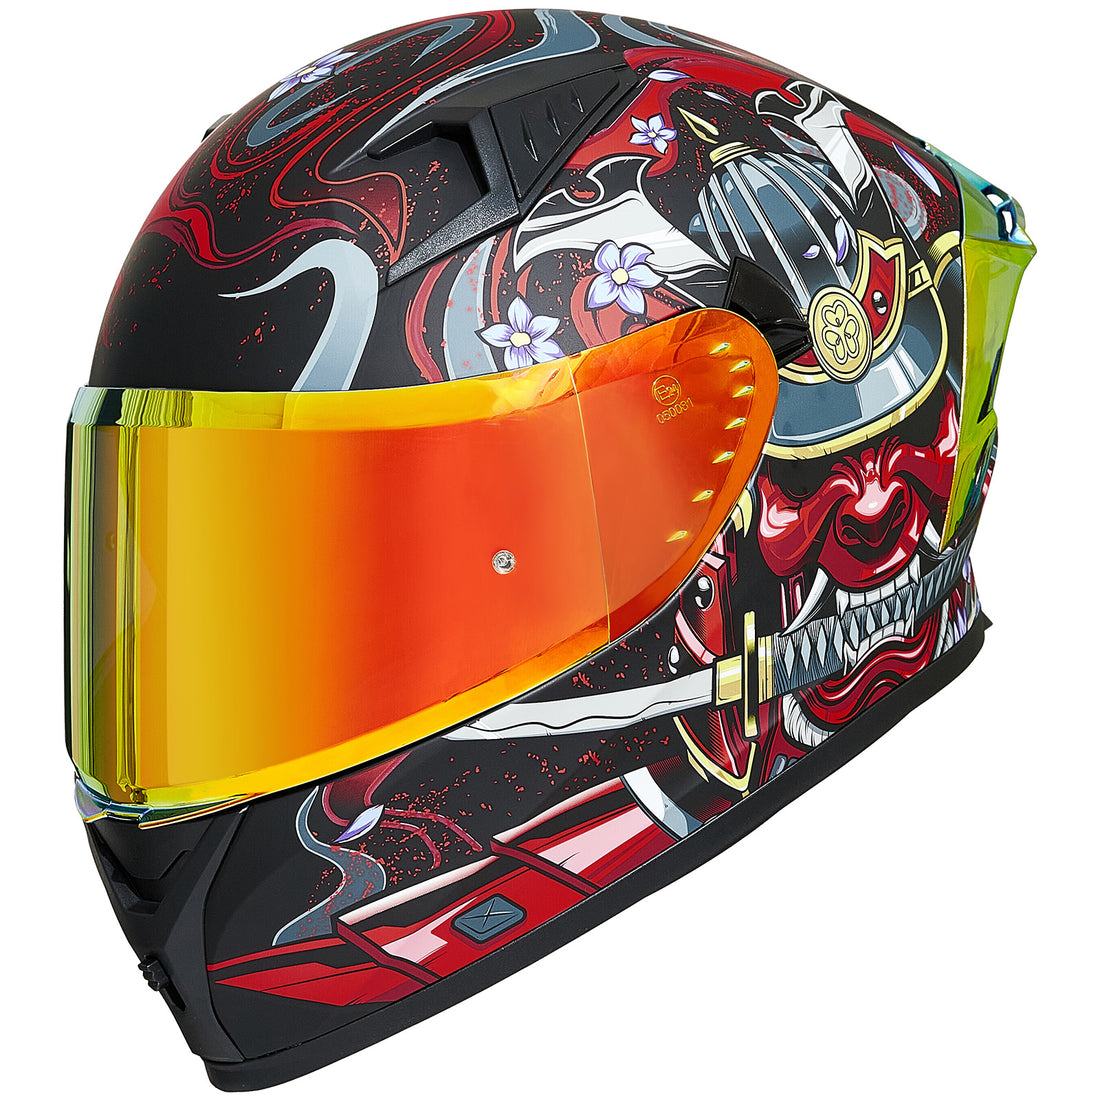 Euro style and safety for the sporty rider with MT Helmets